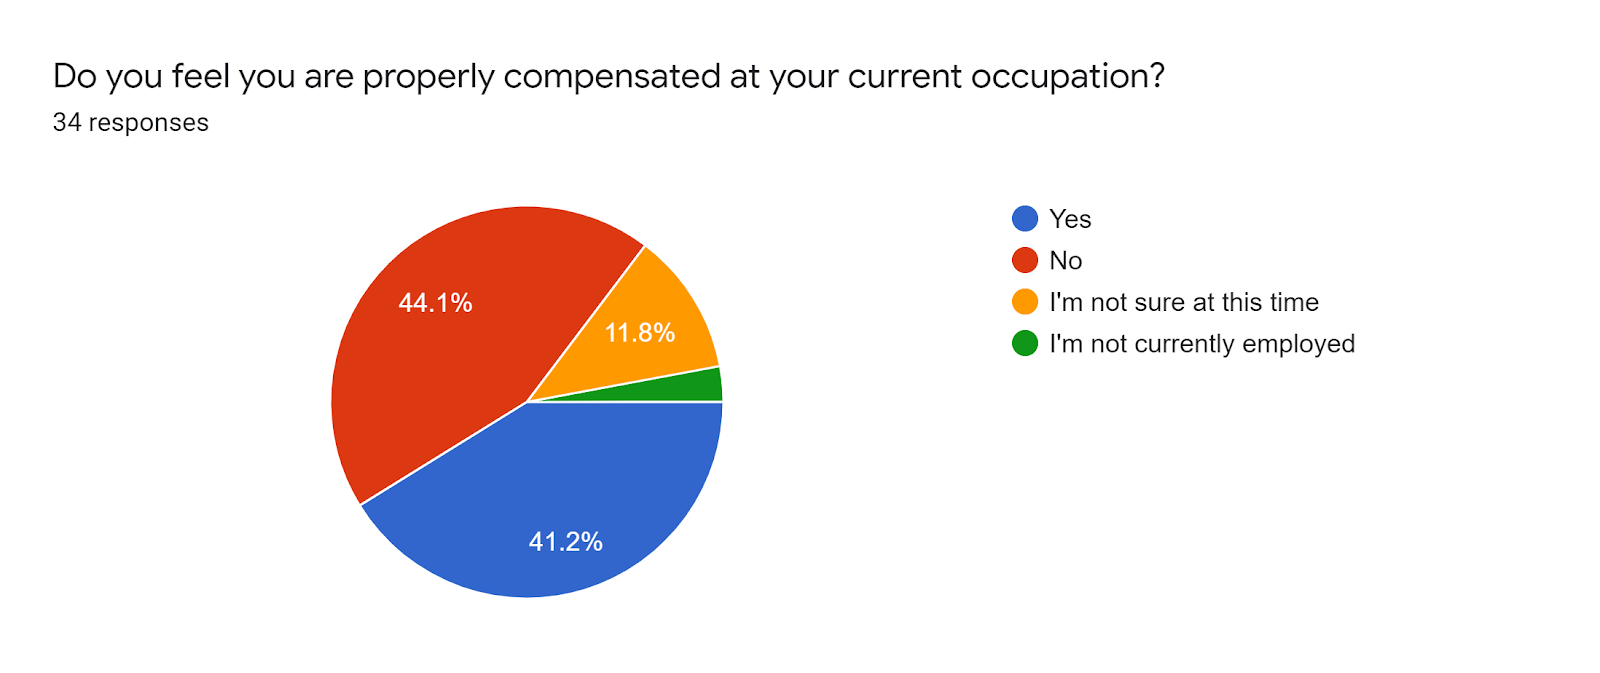 Forms response chart. Question title: Do you feel you are properly compensated at your current occupation?. Number of responses: 34 responses.